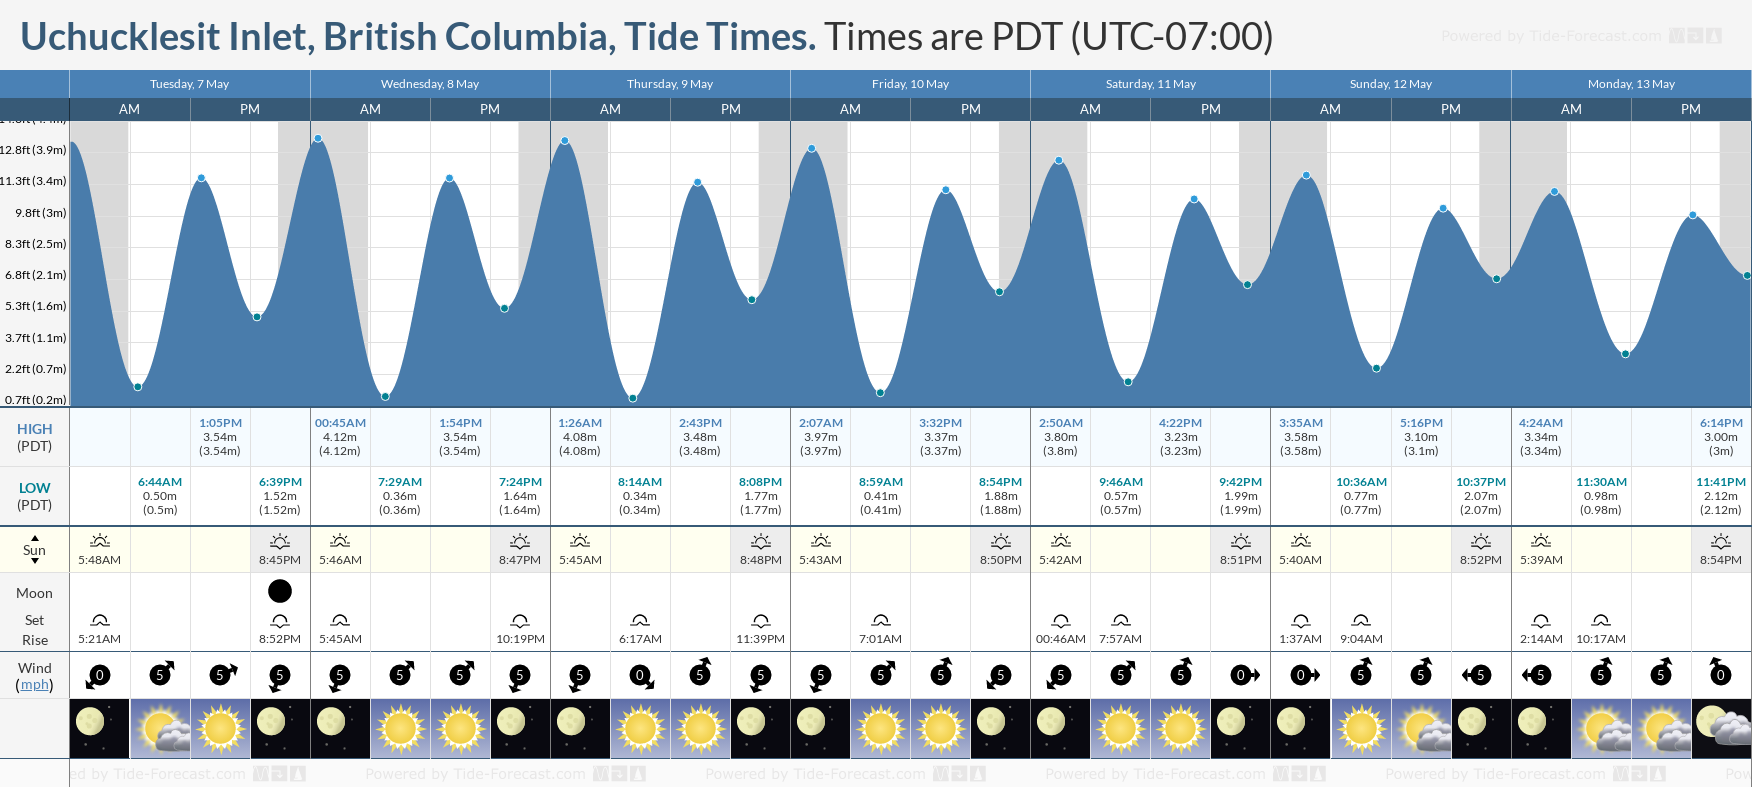 Uchucklesit Inlet, British Columbia Tide Chart including high and low tide tide times for the next 7 days